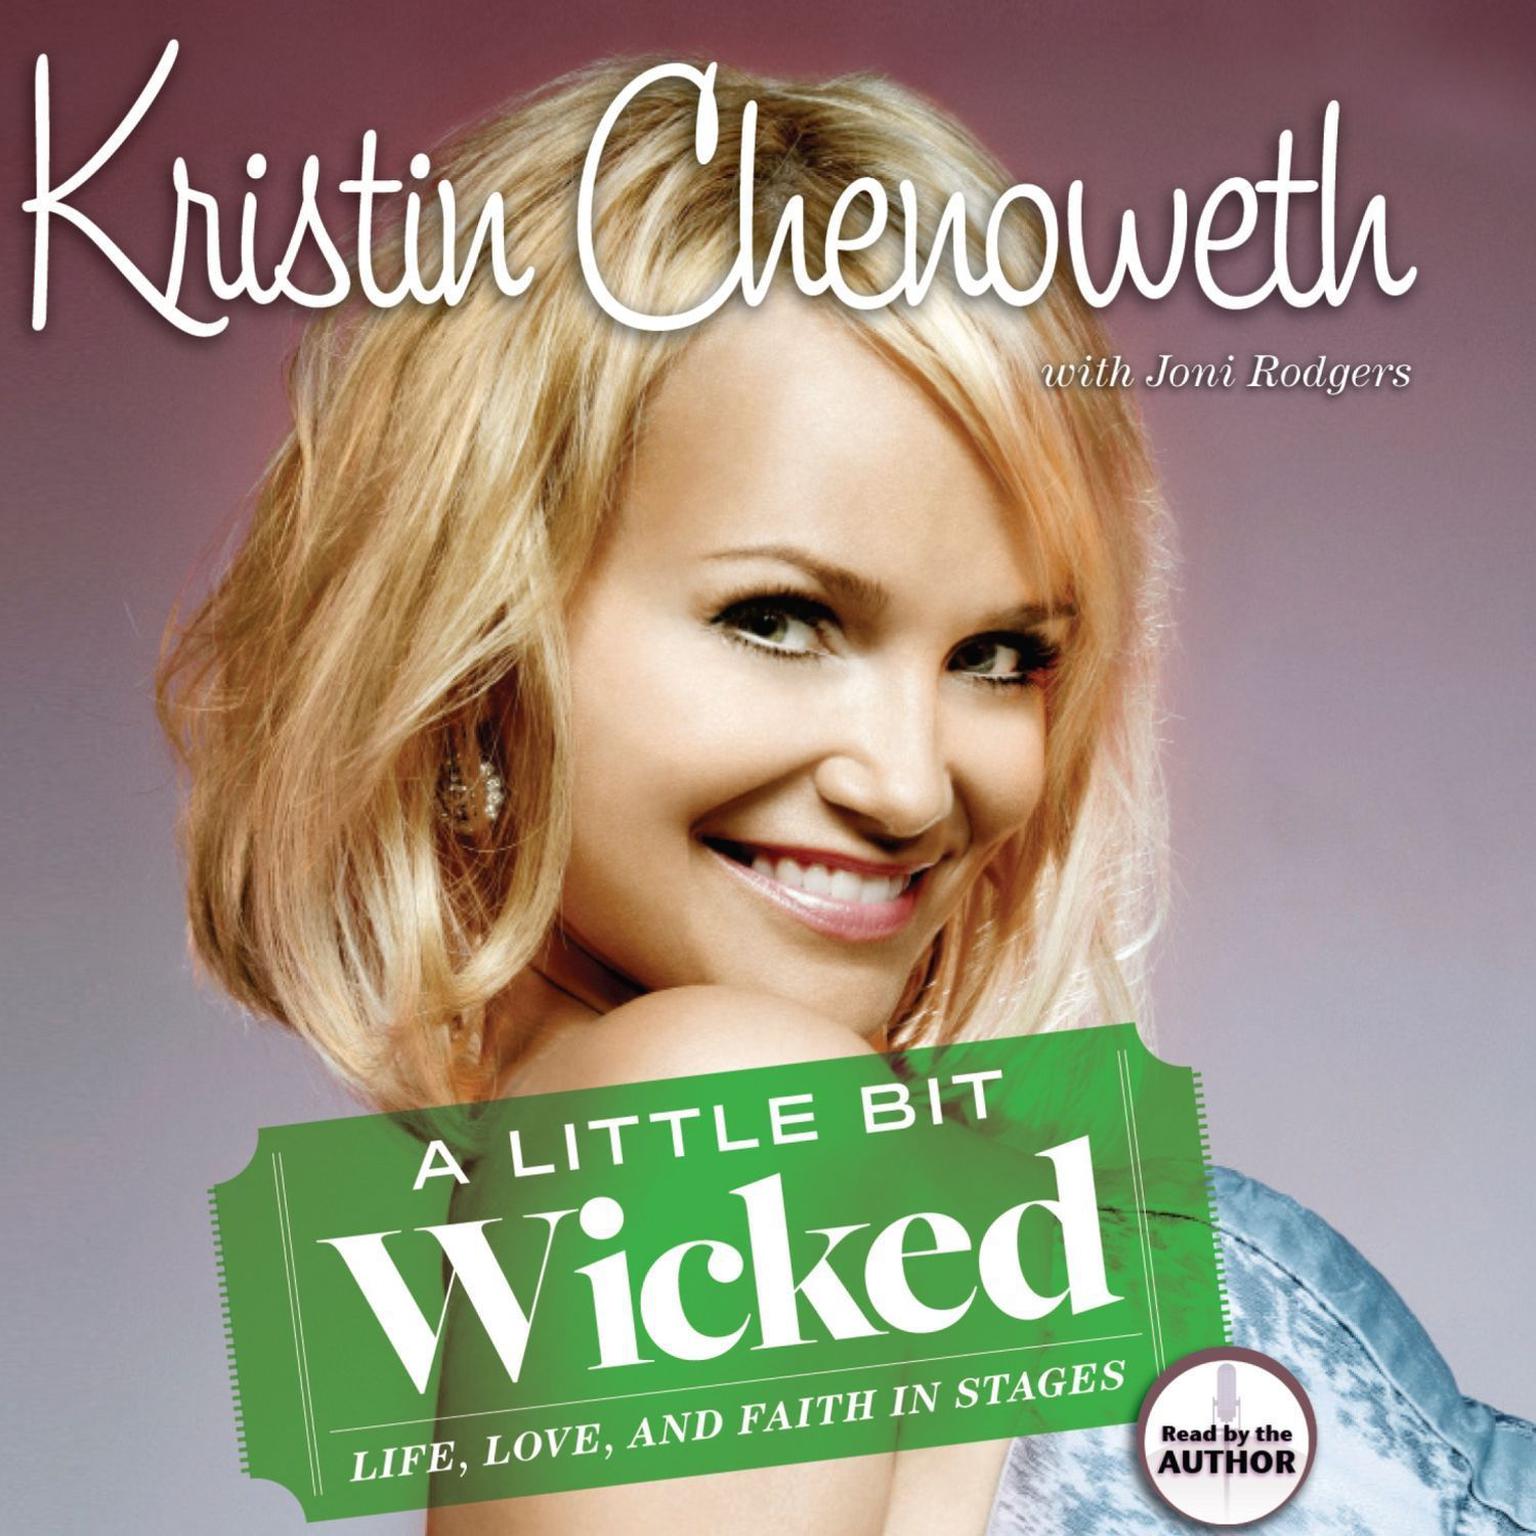 A Little Bit Wicked: Life, Love, and Faith in Stages Audiobook, by Kristin Chenoweth